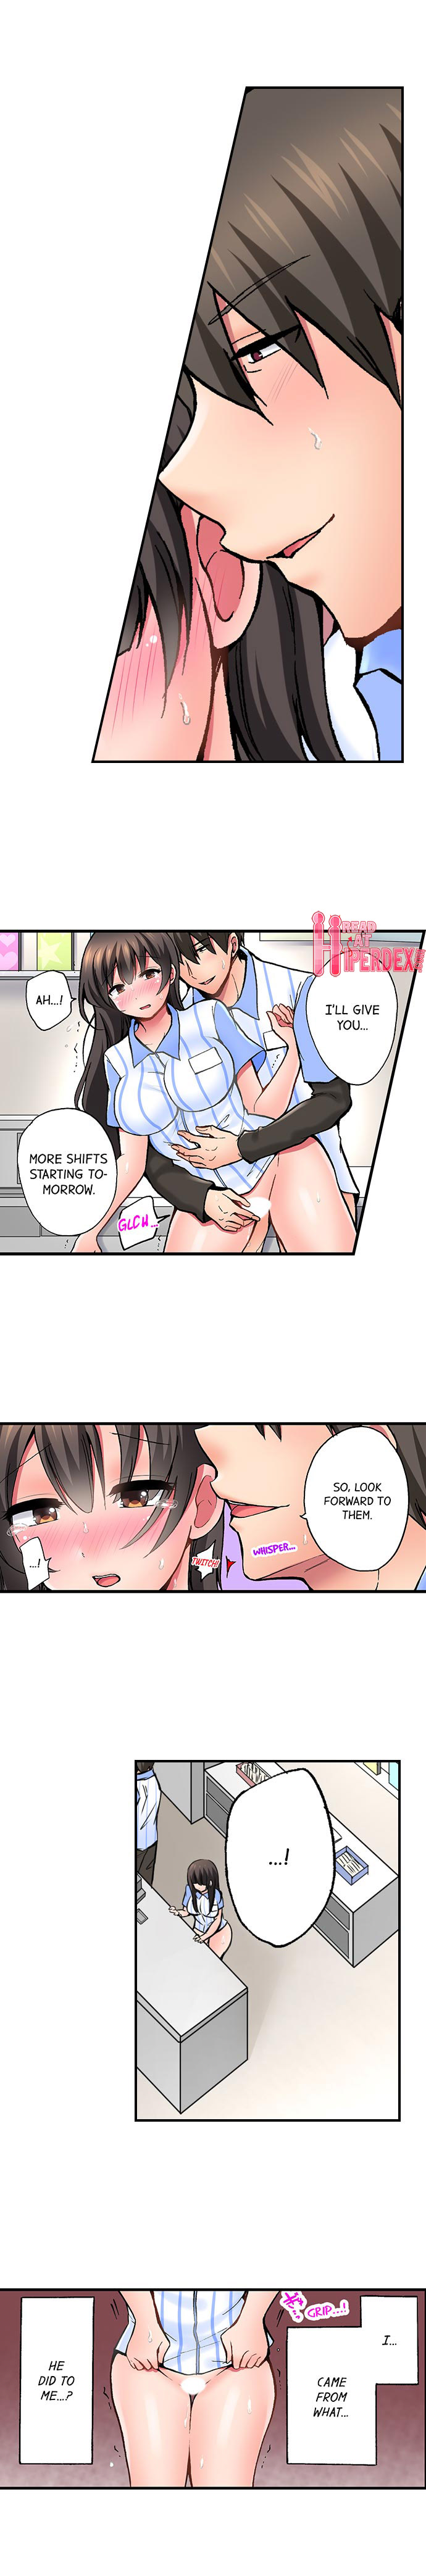 You Stole Condoms, so I Can Steal Your Virginity, Right? - Chapter 4 Page 4